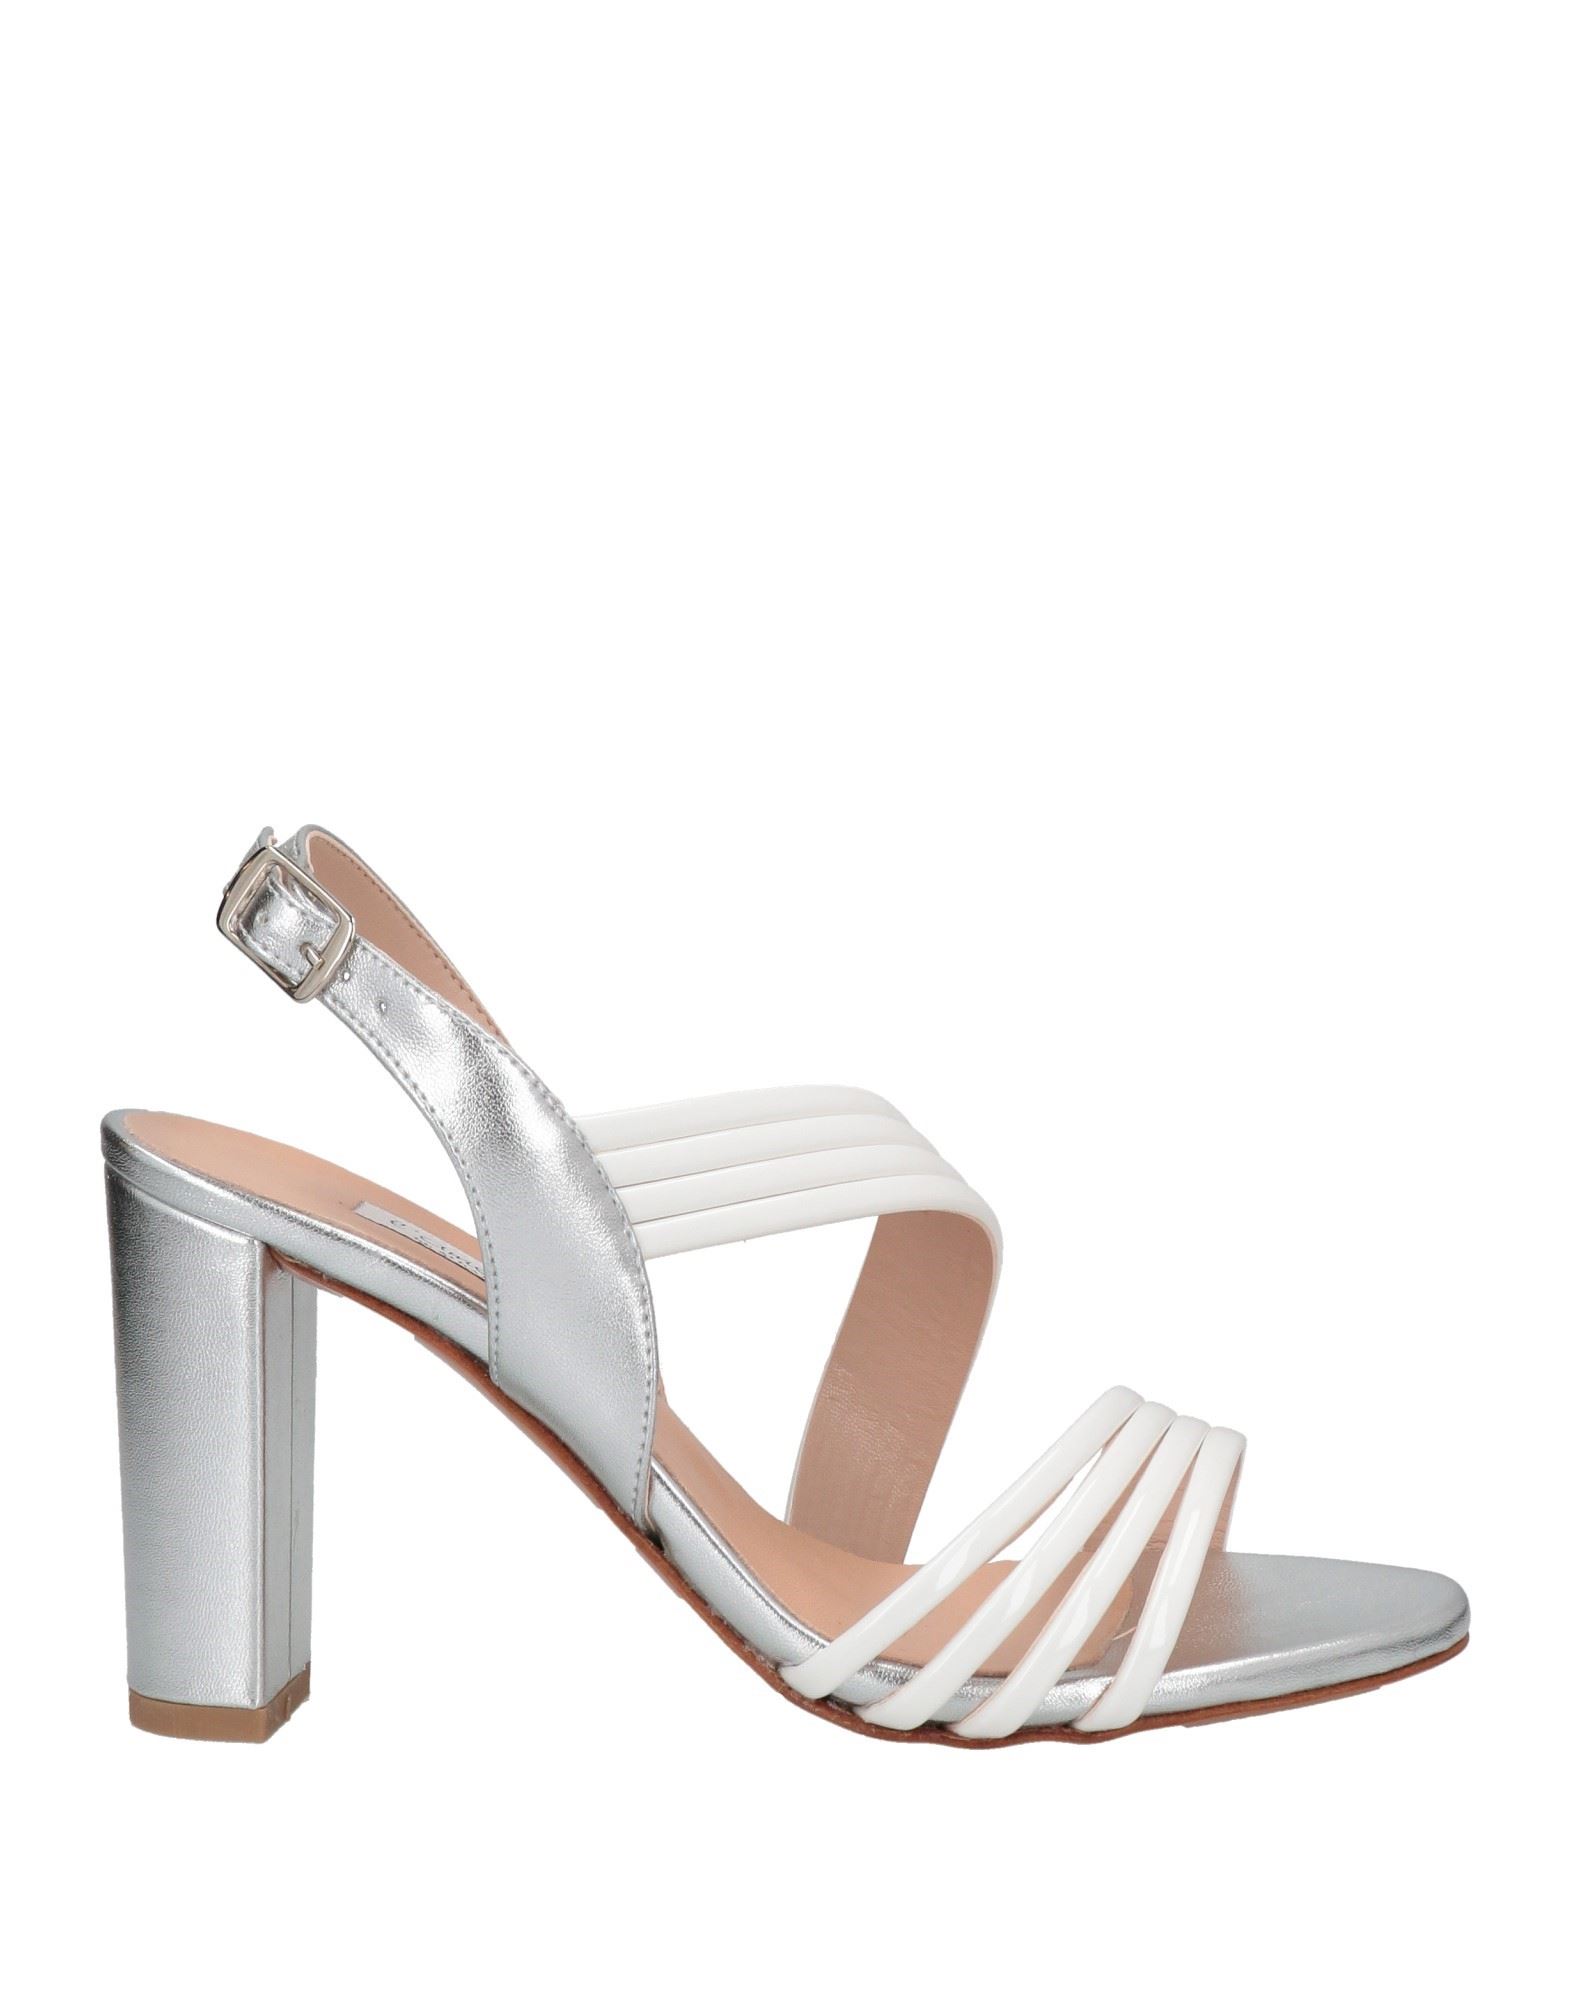 L'amour By Albano Sandals In White